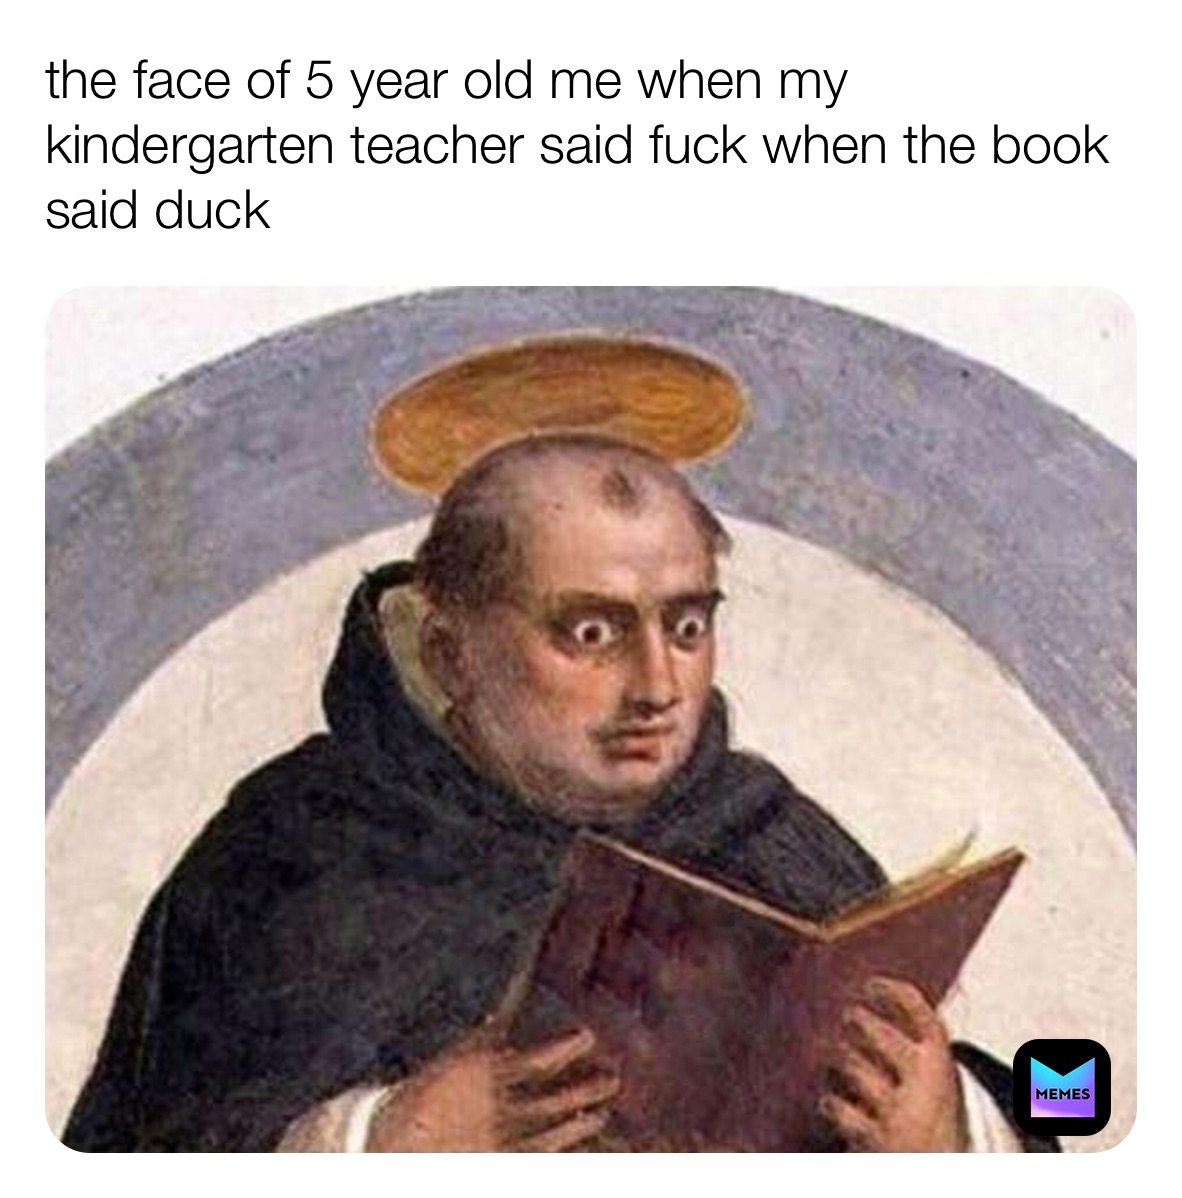 the face of 5 year old me when my kindergarten teacher said fuck when the book said duck